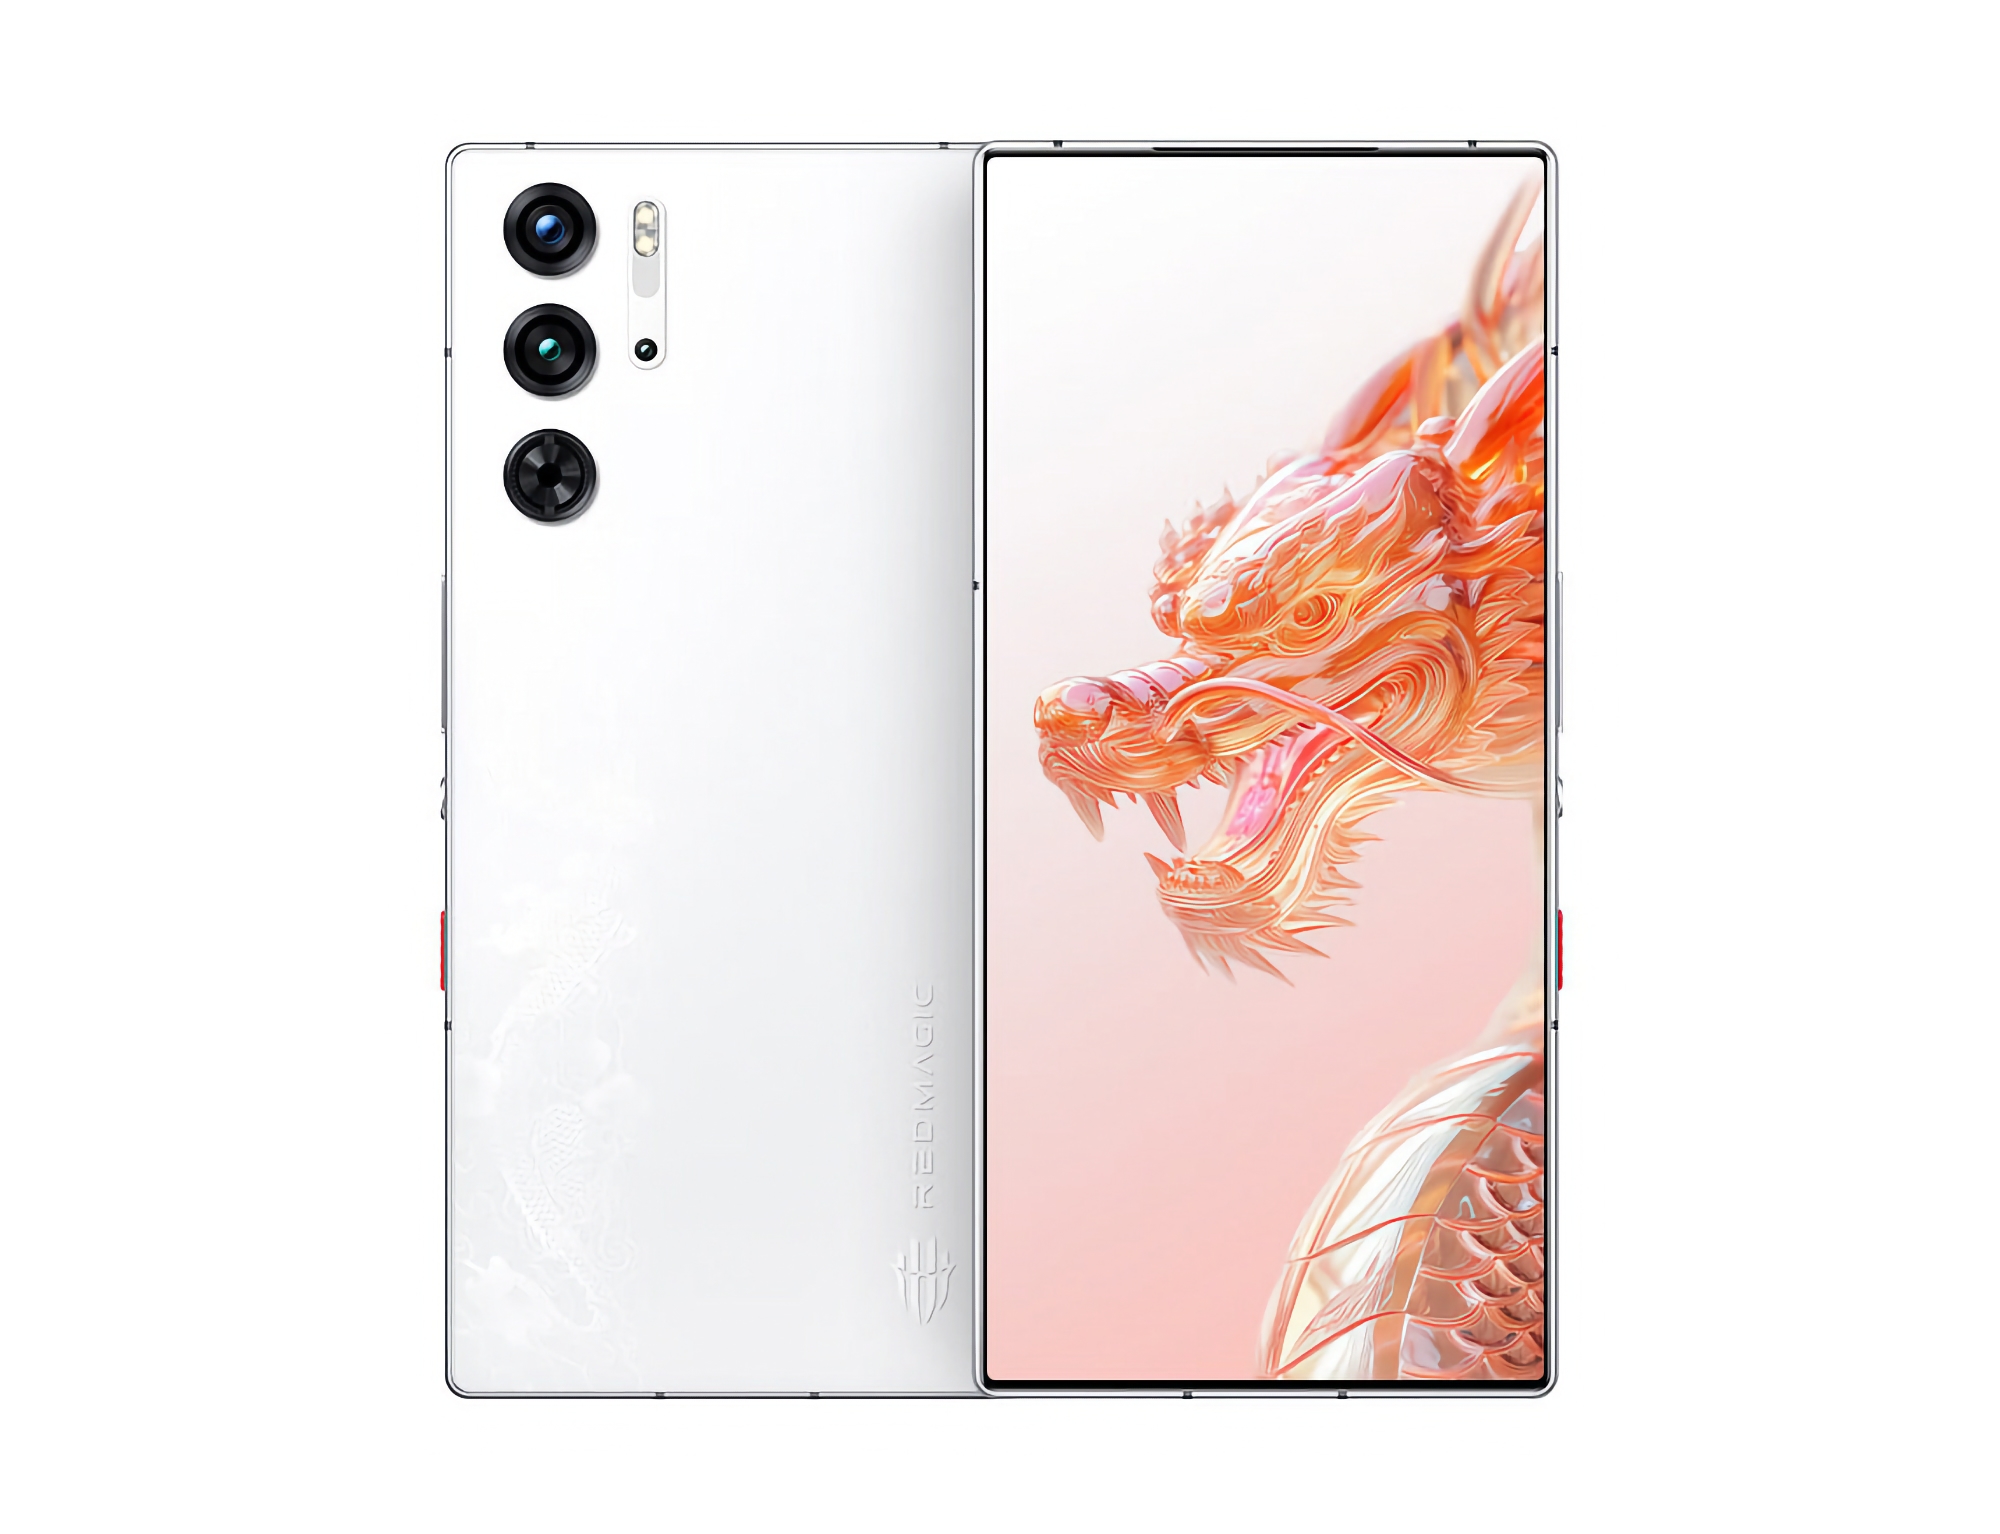 Sky Dragon: Nubia has unveiled a special version of the Red Magic 9 Pro with white colour, 16GB RAM and 512GB storage